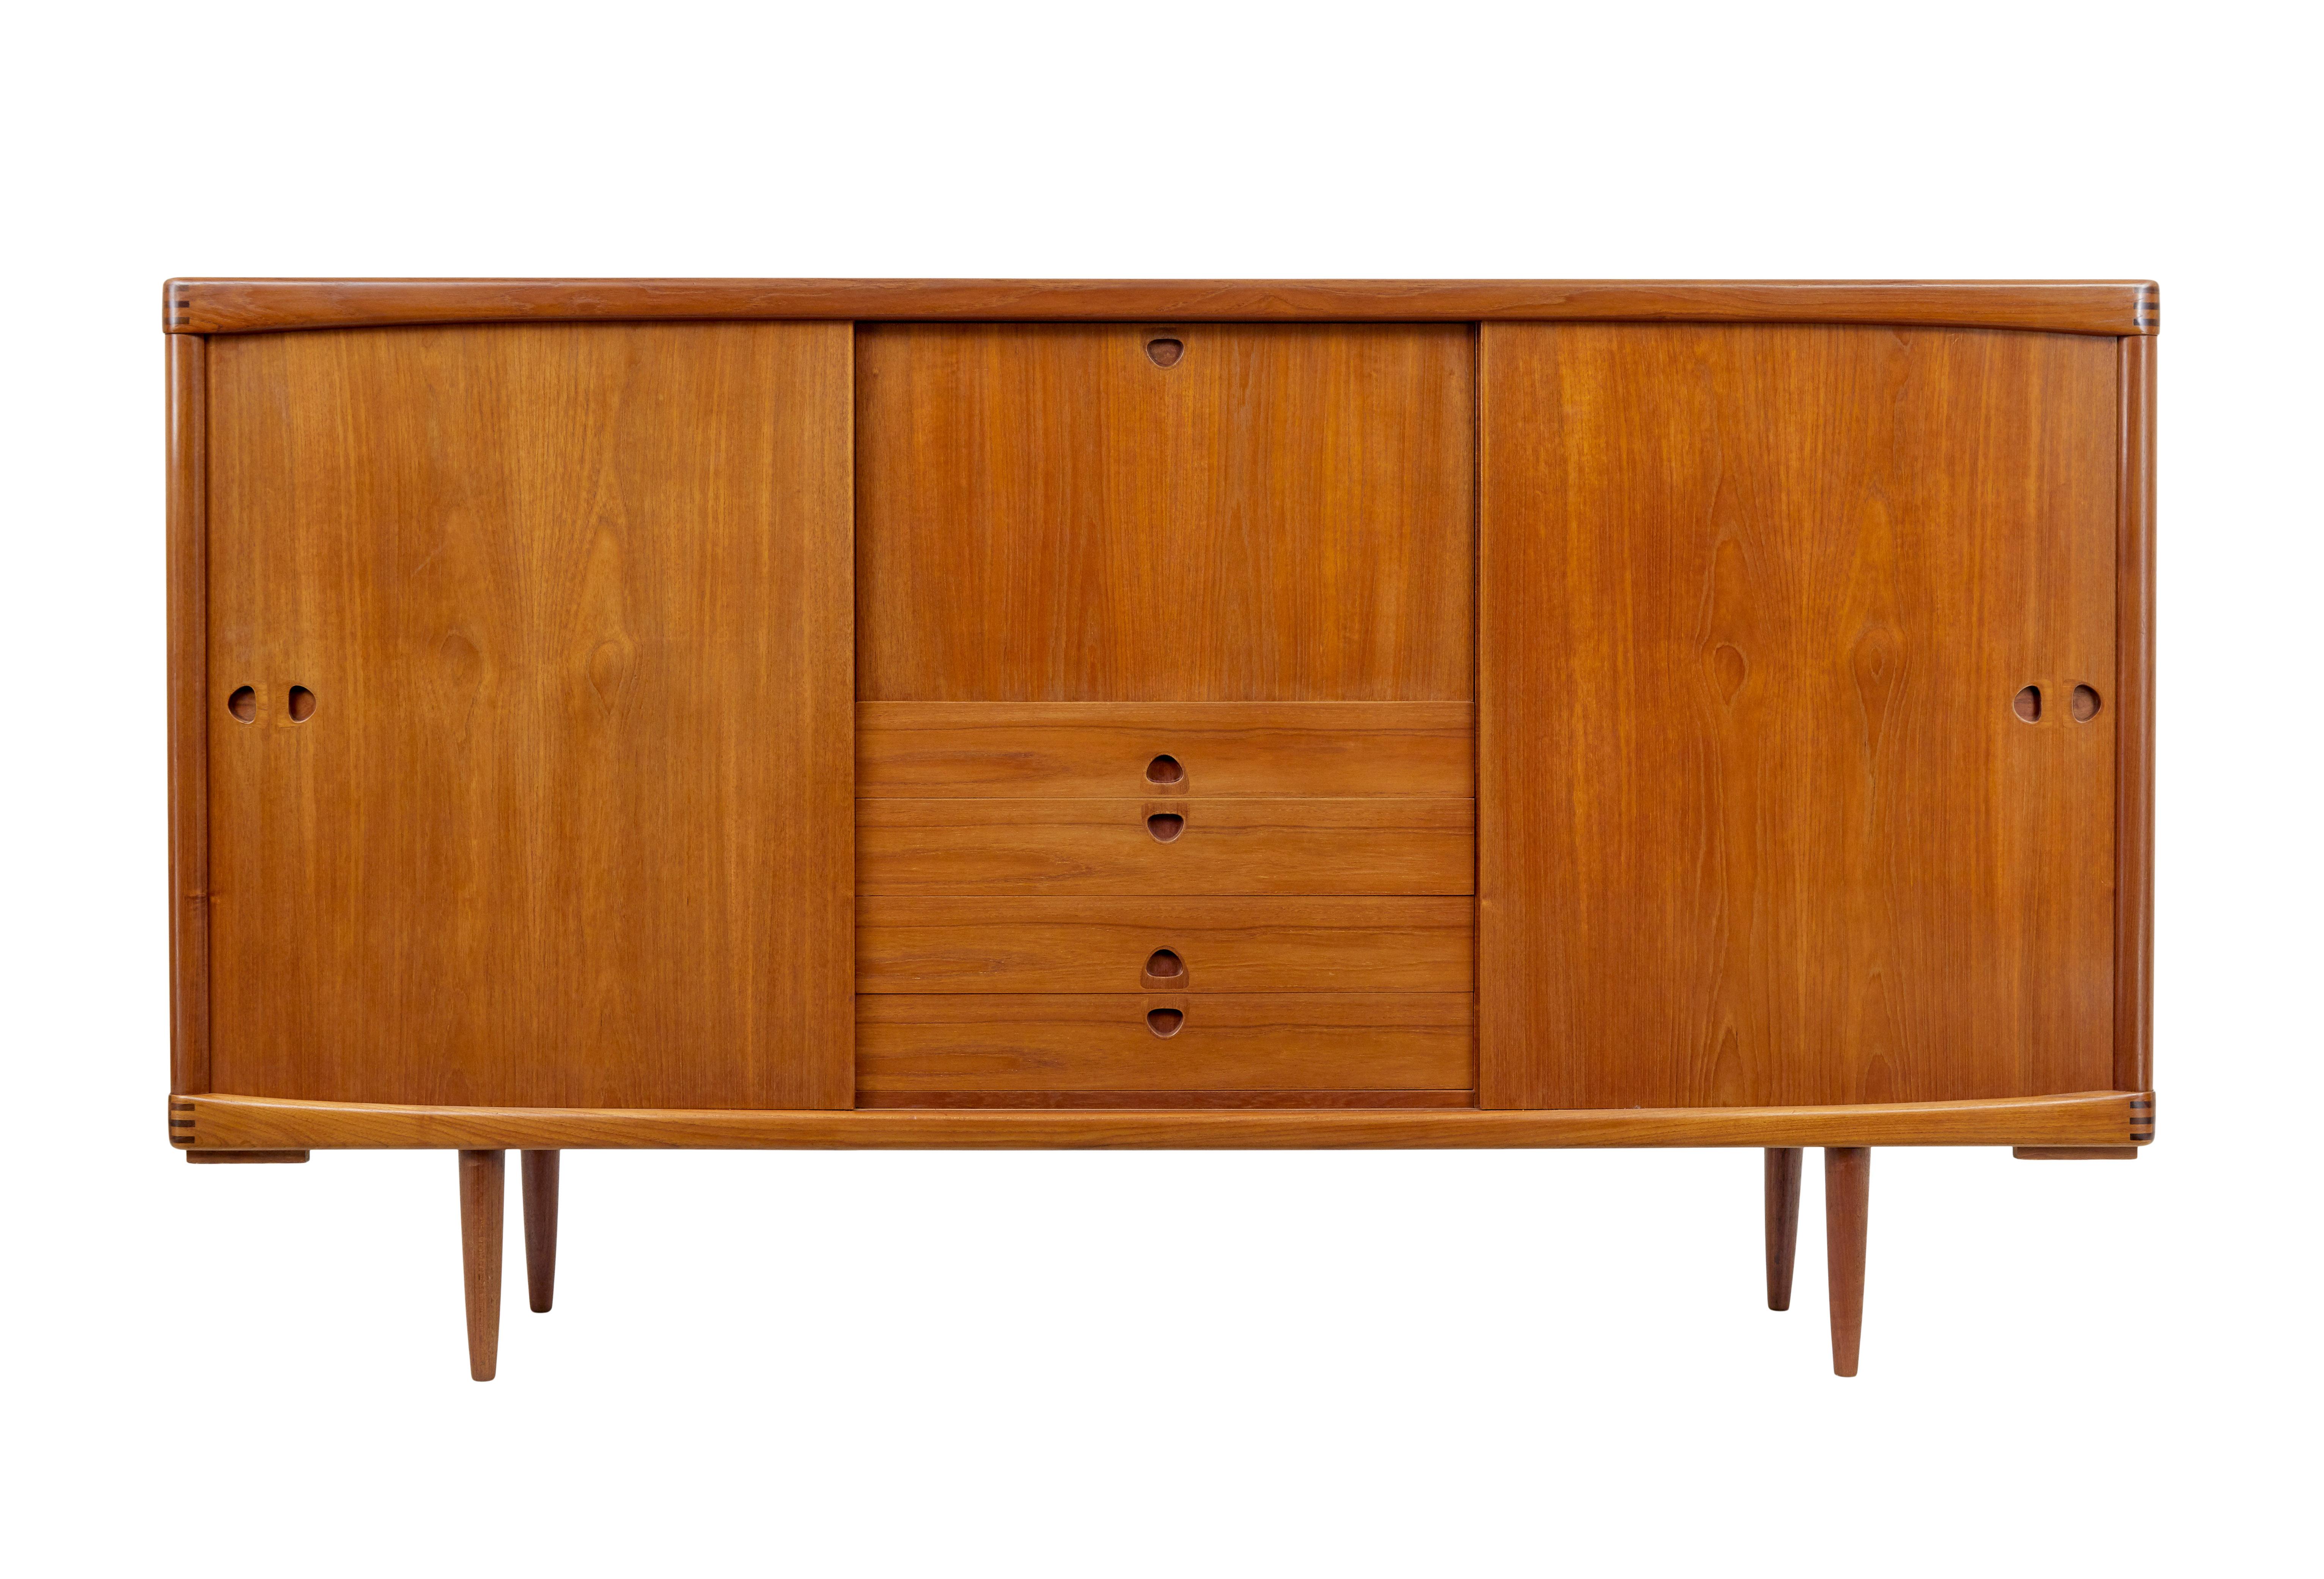 Mid century danish teak highboard by H.W.Klein for Bramin circa 1960.

Here we offer a highboard buffet designed by Norwegian designer h.W.Klein for danish furniture makers Bramin.

Made from solid teak.  Central cabinet with a single shelf which is